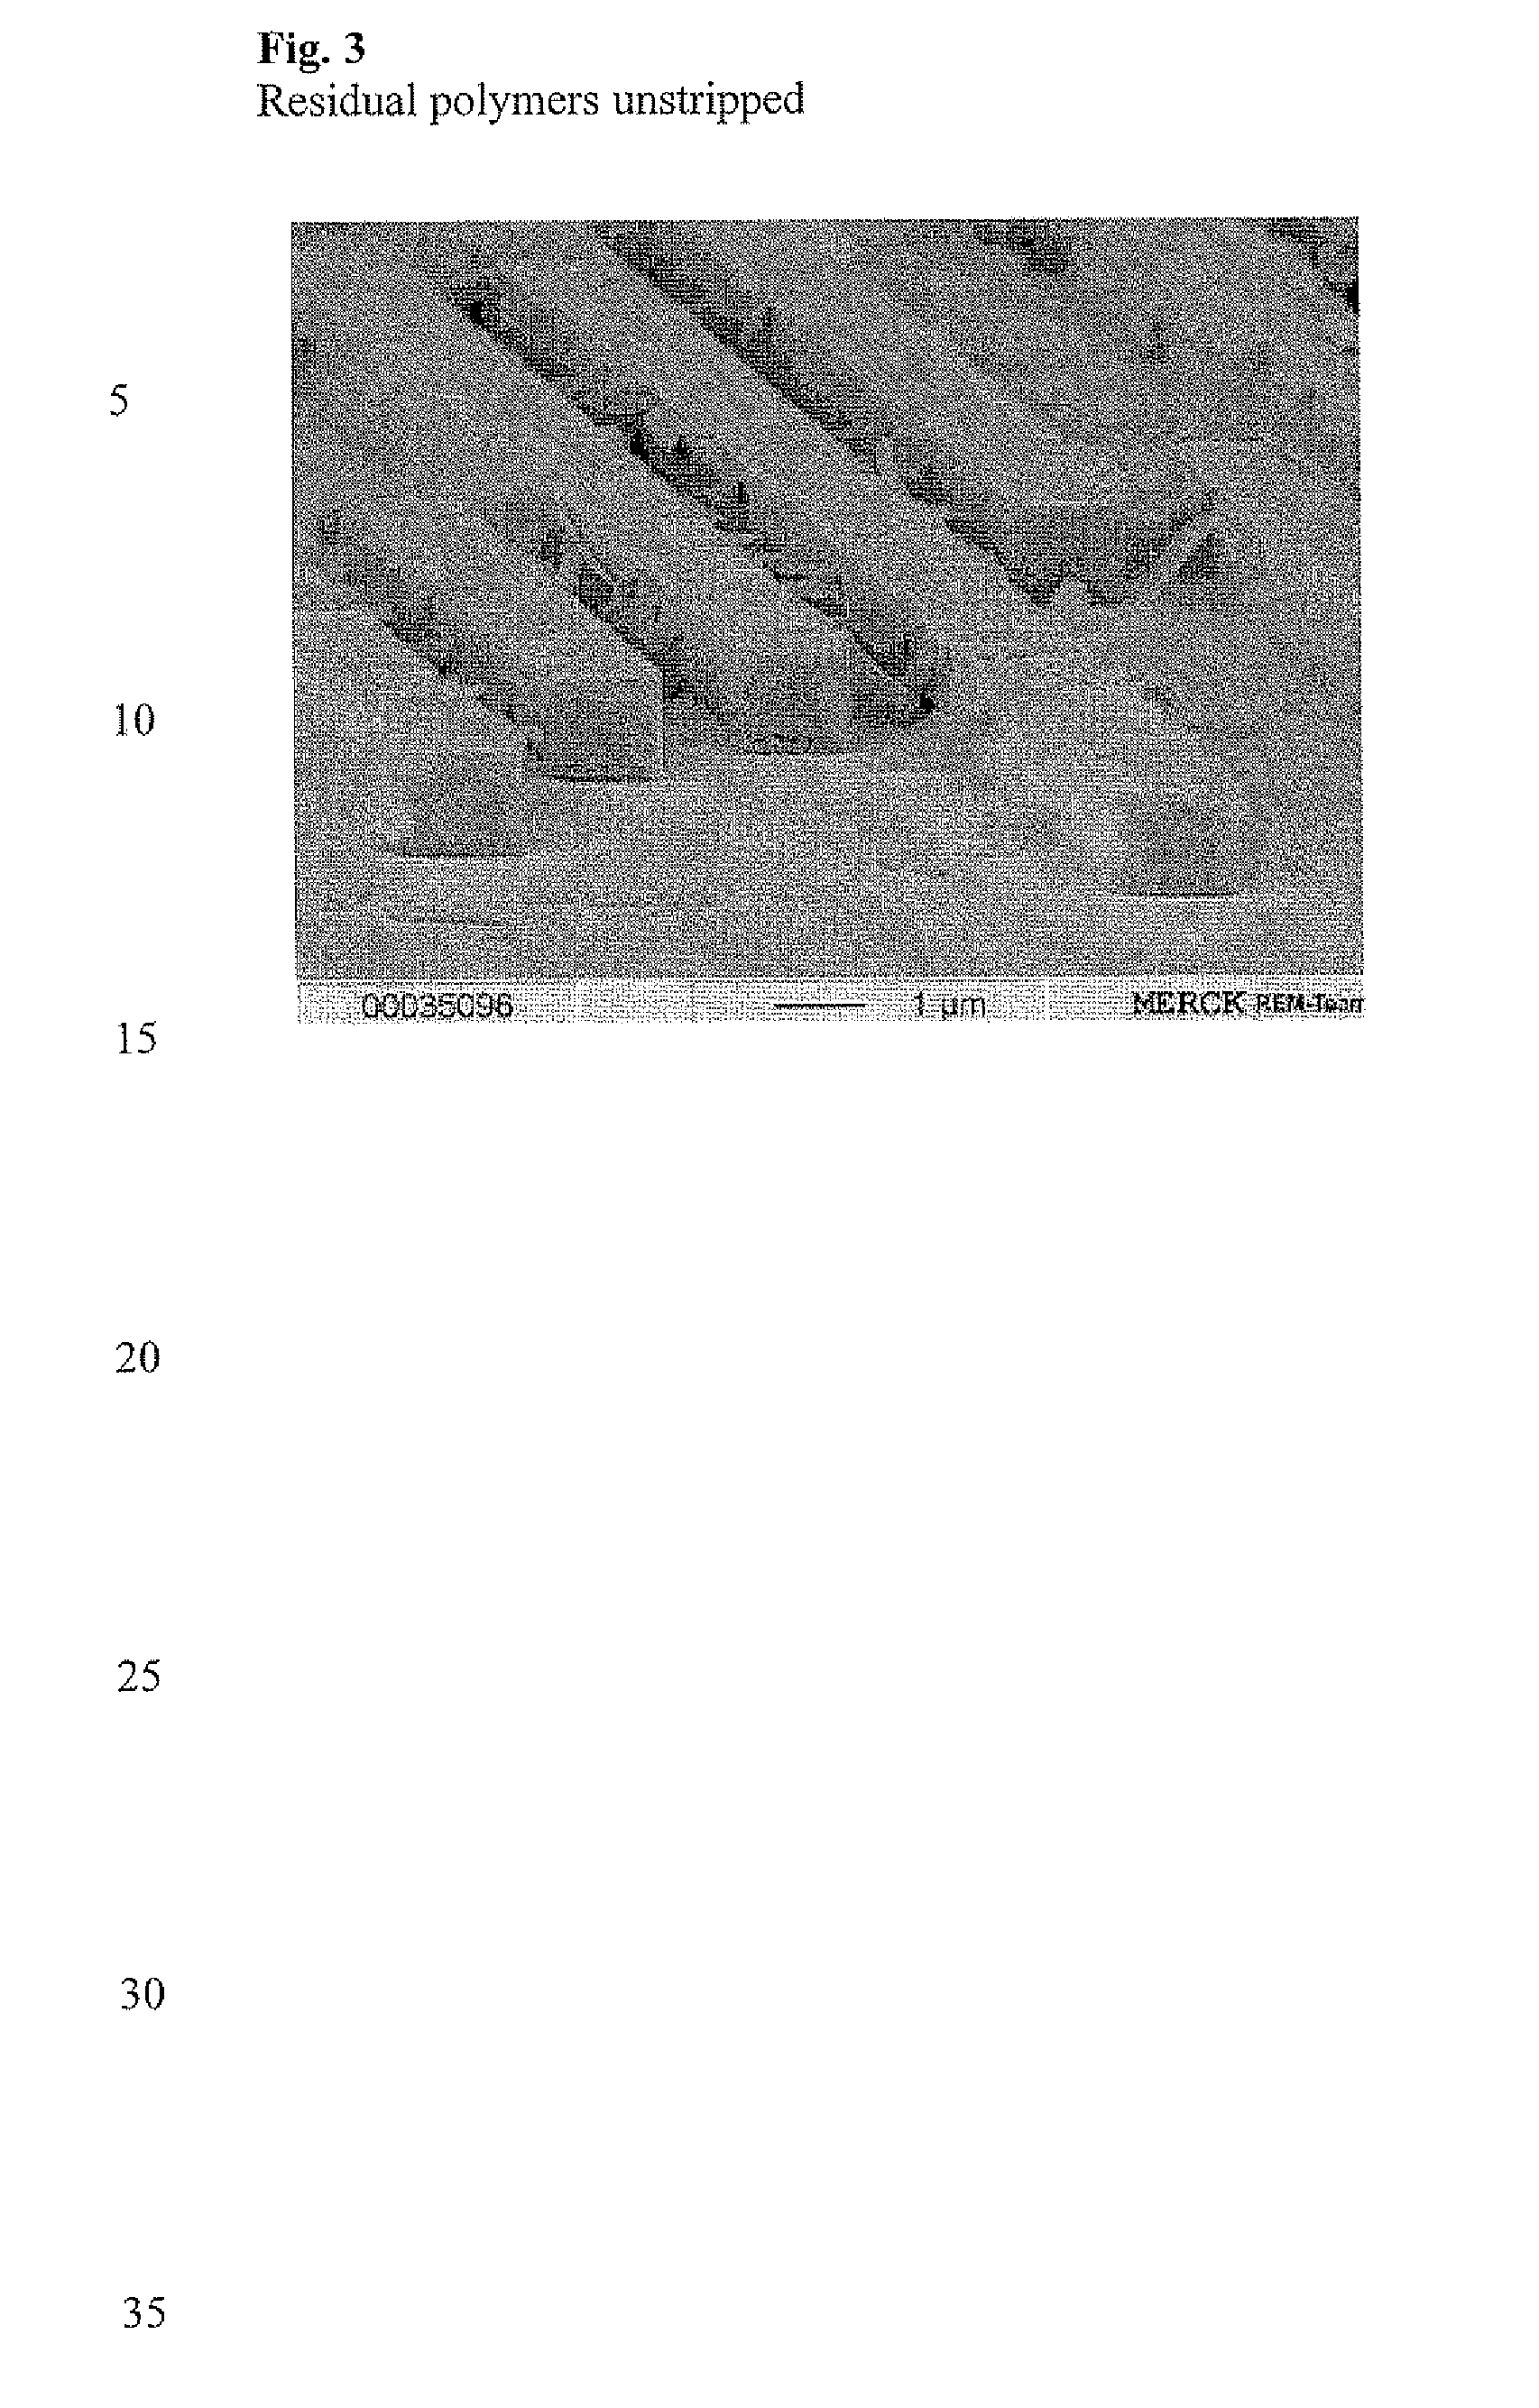 Composition for the removing of sidewall residues